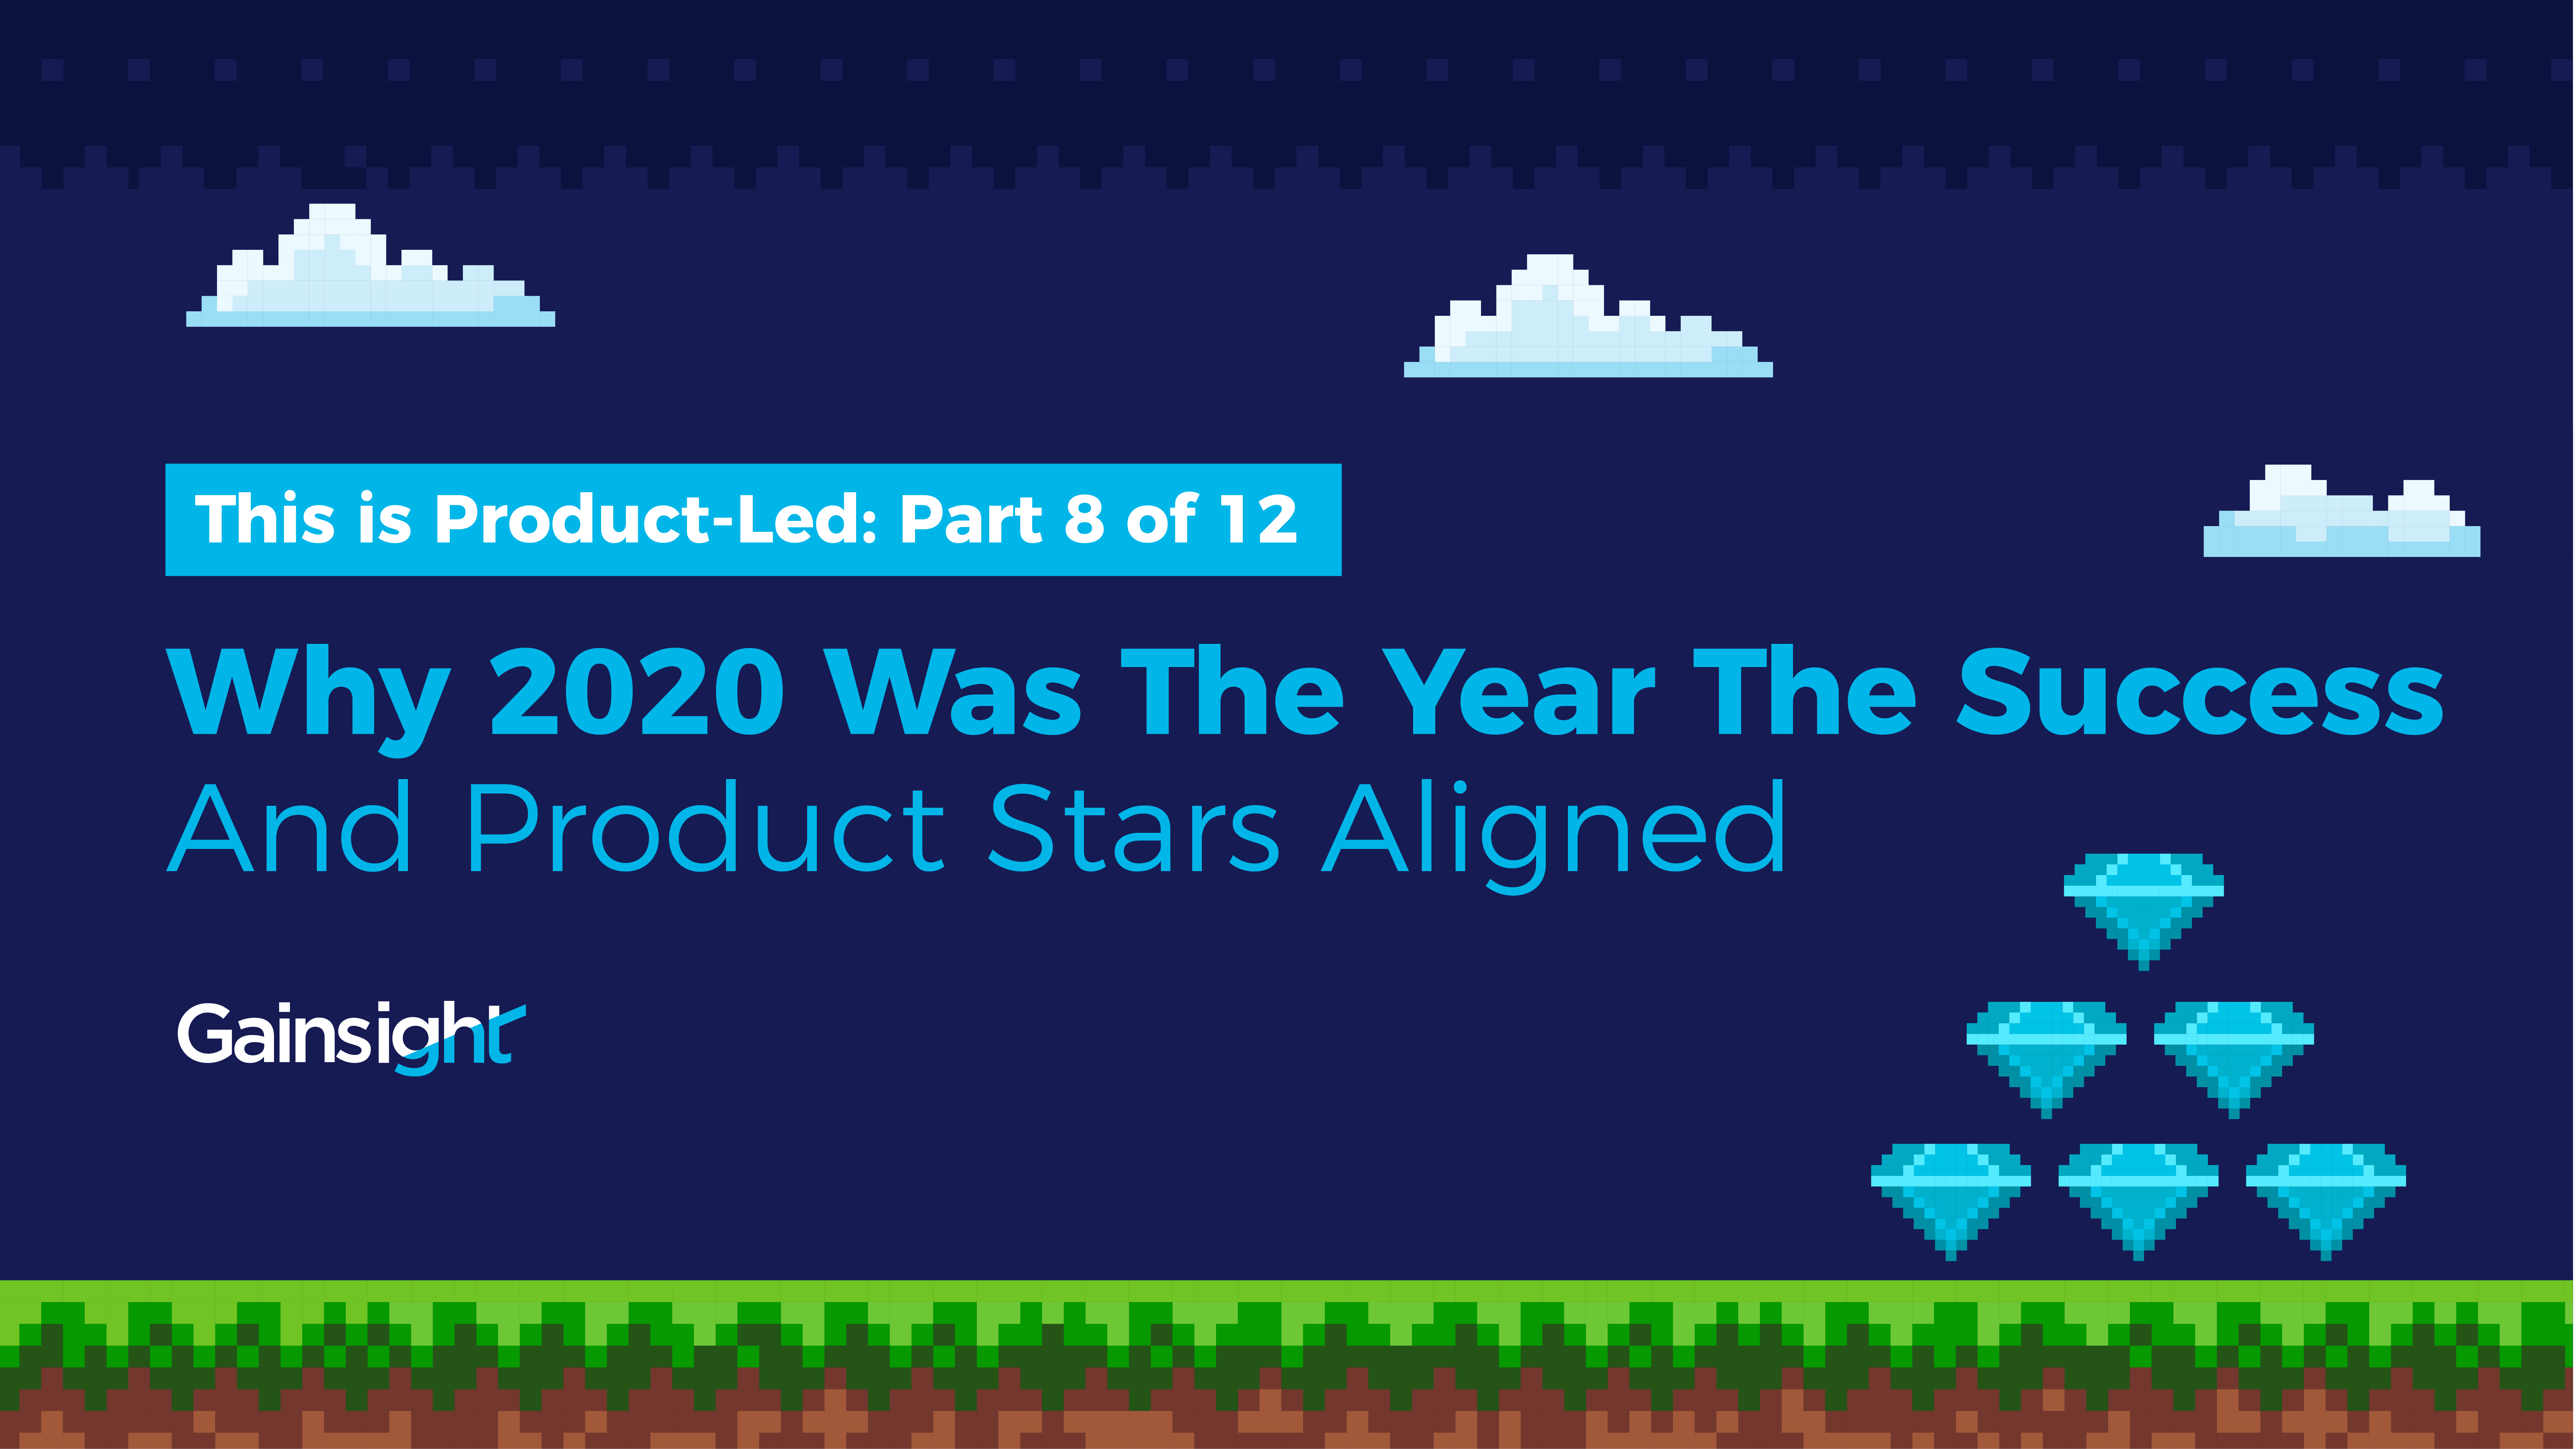 Why 2020 Was The Year the Success and Product Stars Aligned Image